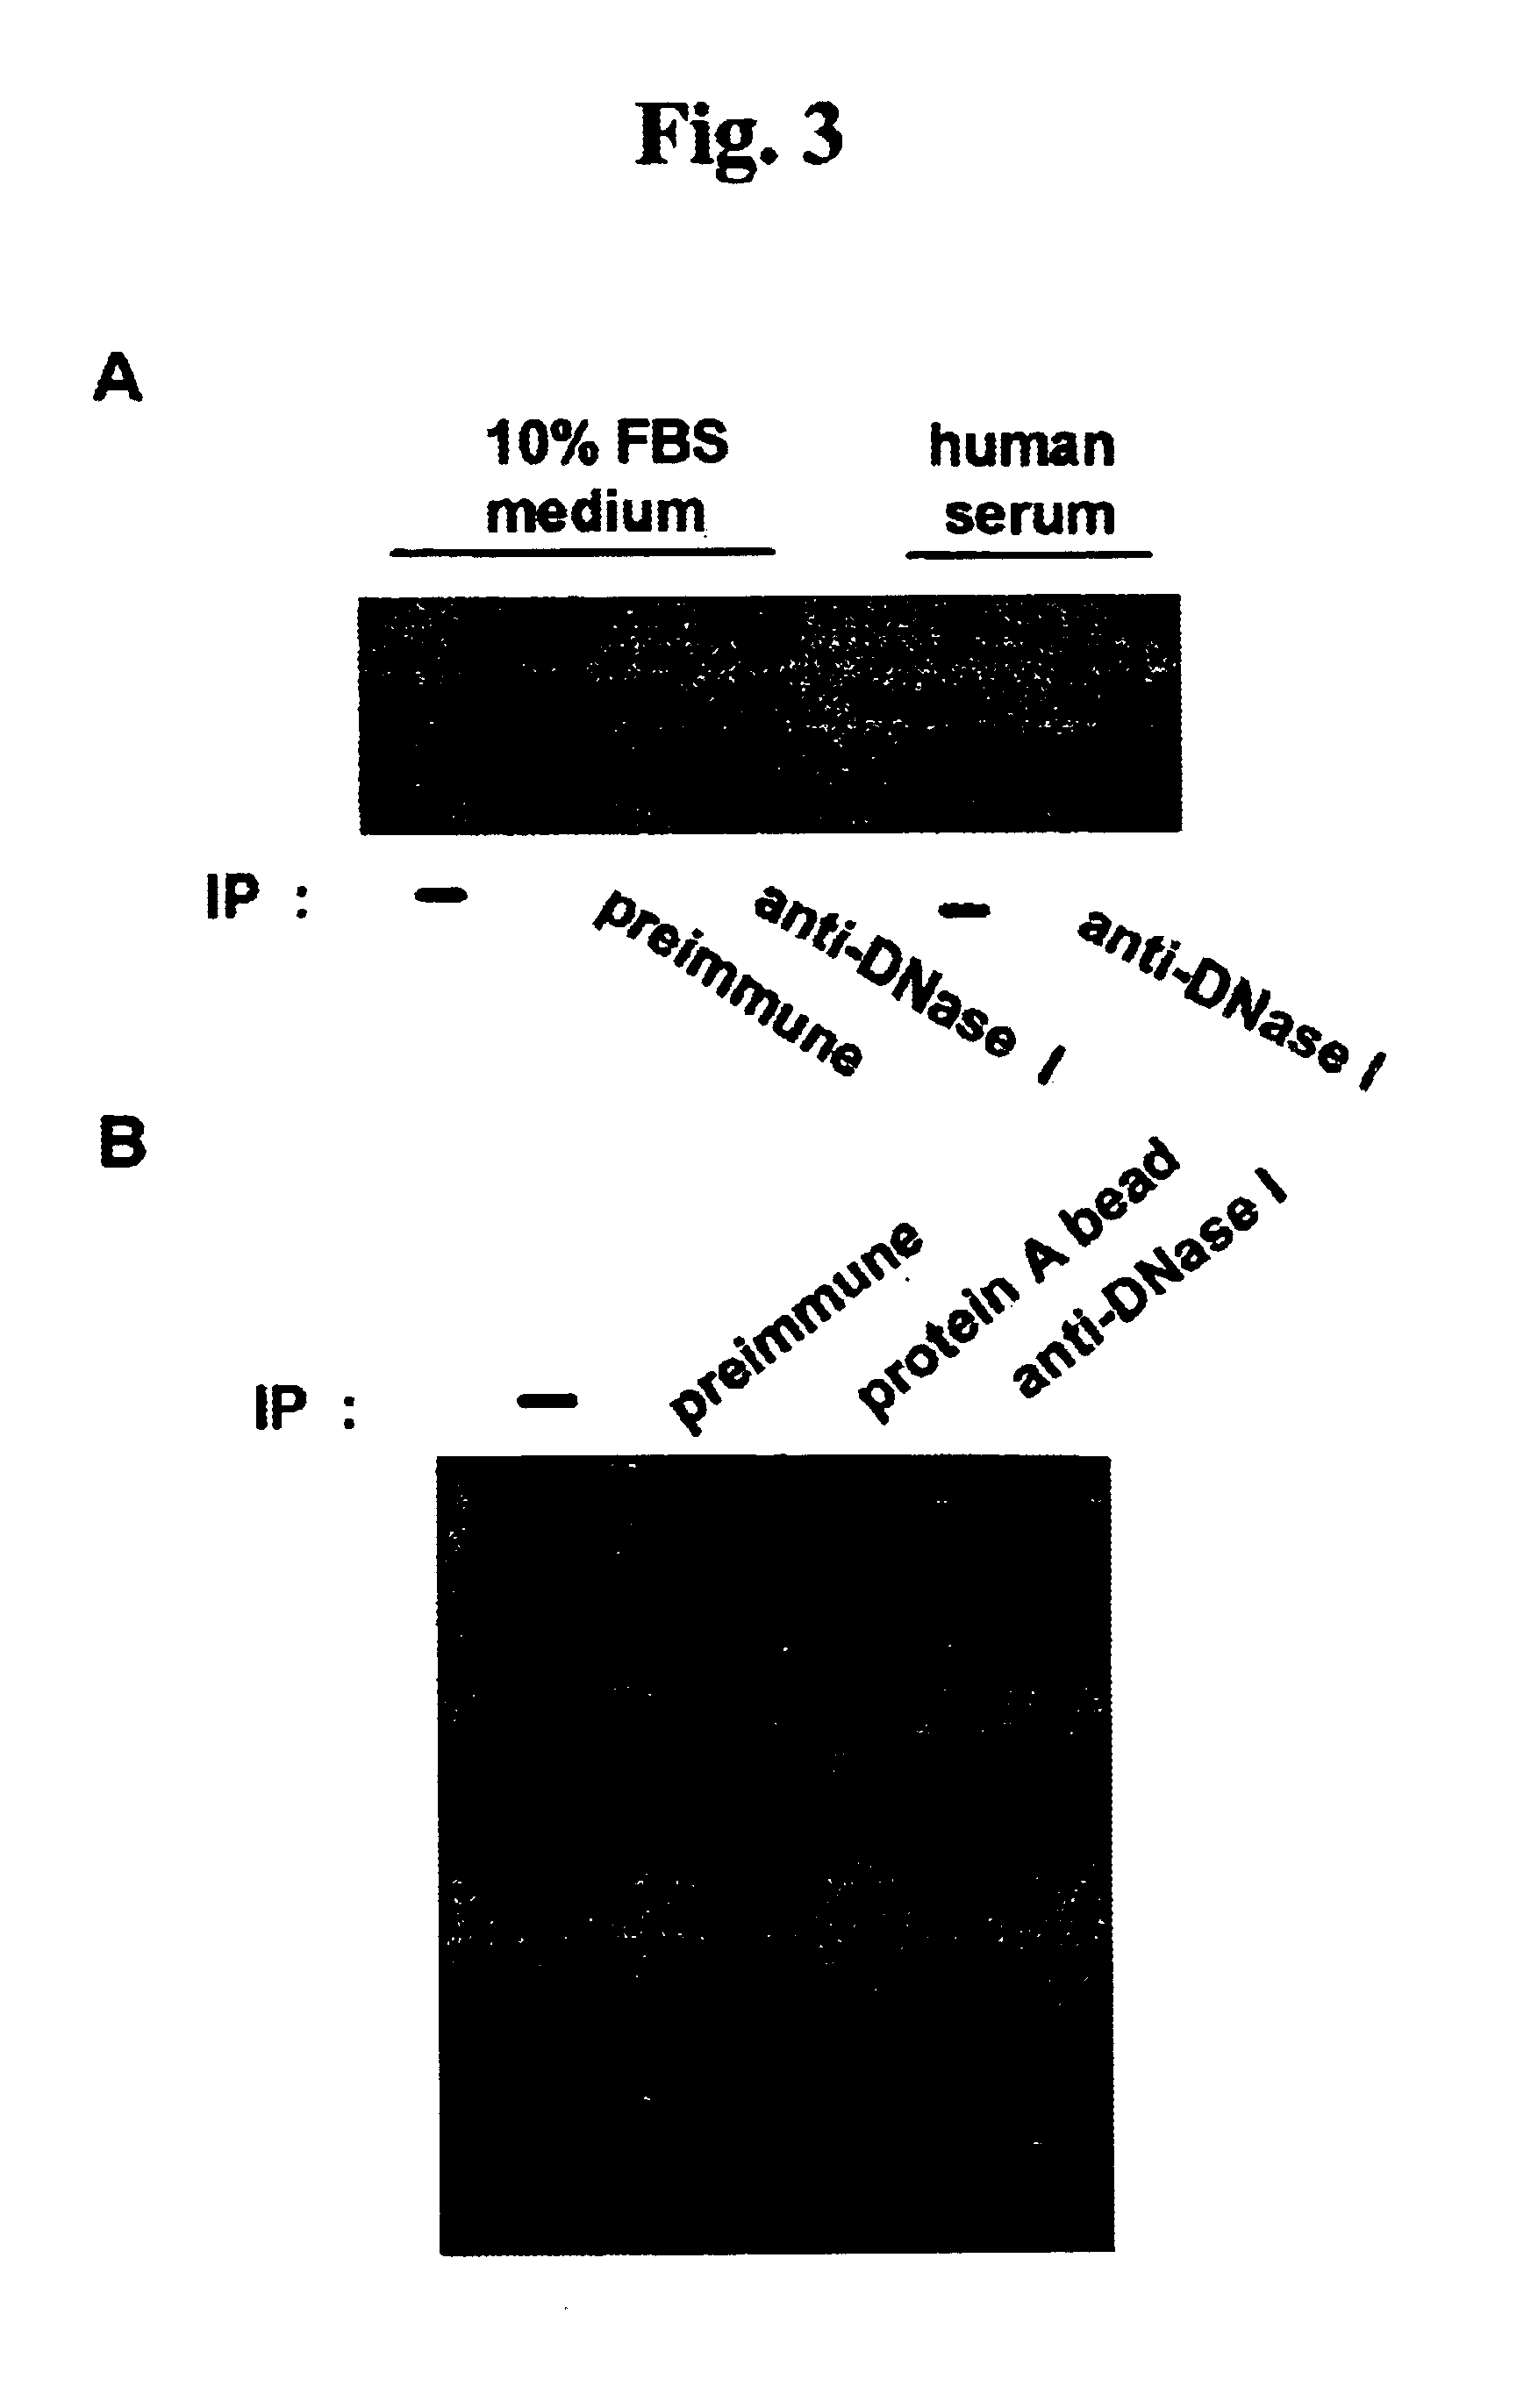 Endonuclease of immune cell, process for producing the same and immune adjuvant using the same